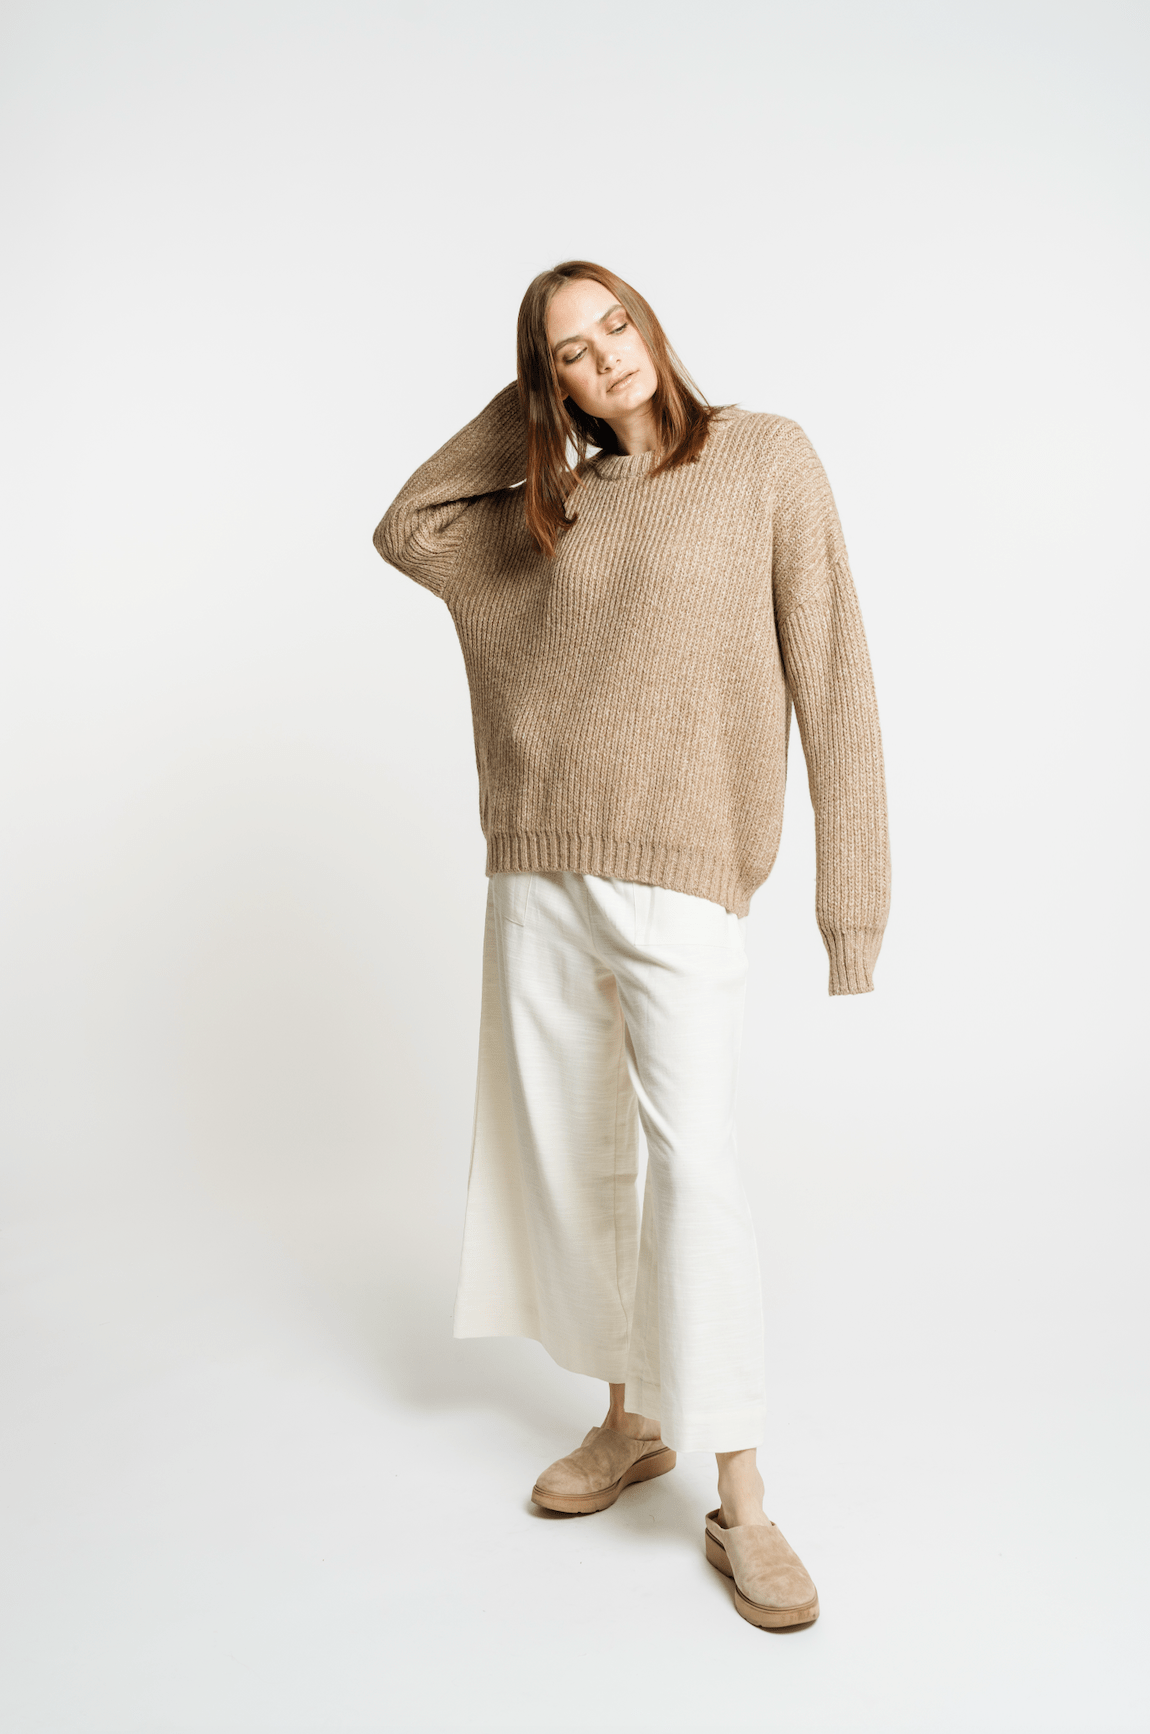 The model is wearing a Field Sweater - Caramel and white pants.